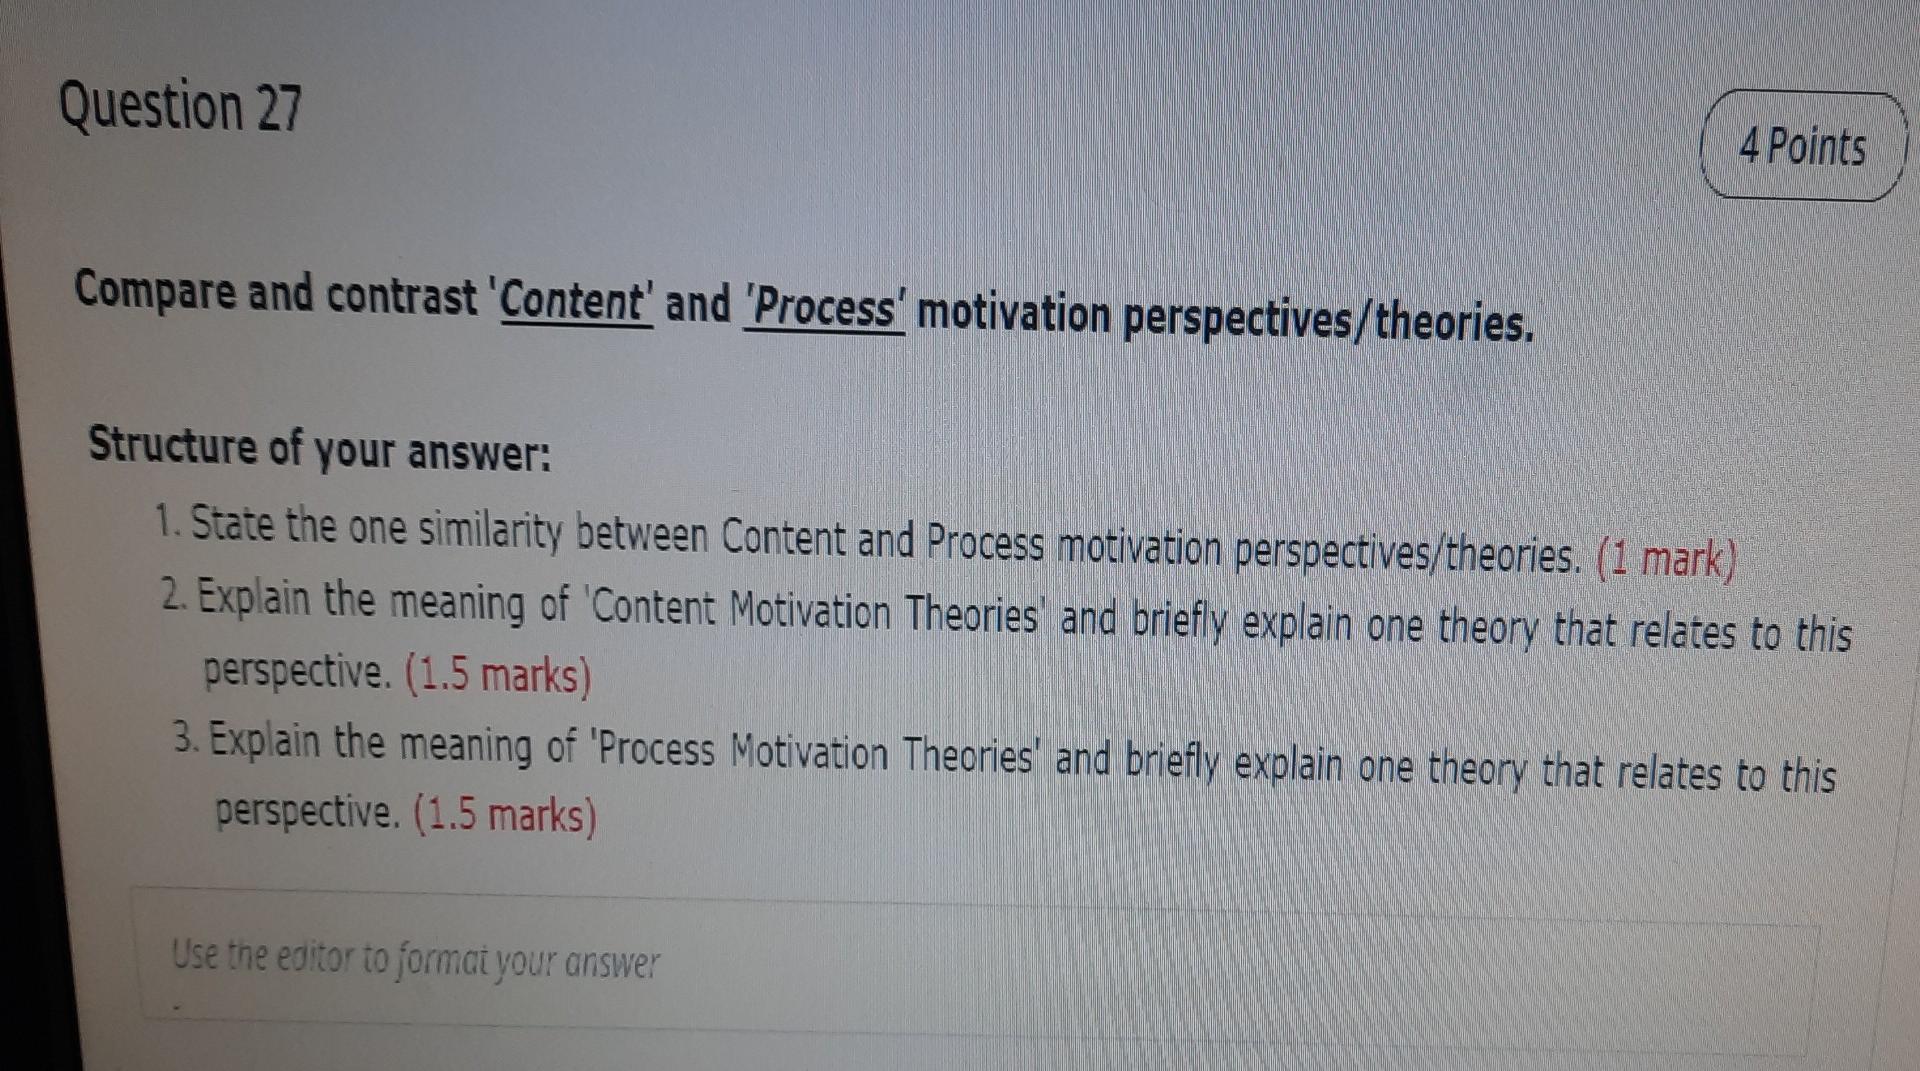 Question 27
4 Points
Compare and contrast Content and Process motivation perspectives/theories.
Structure of your answer: